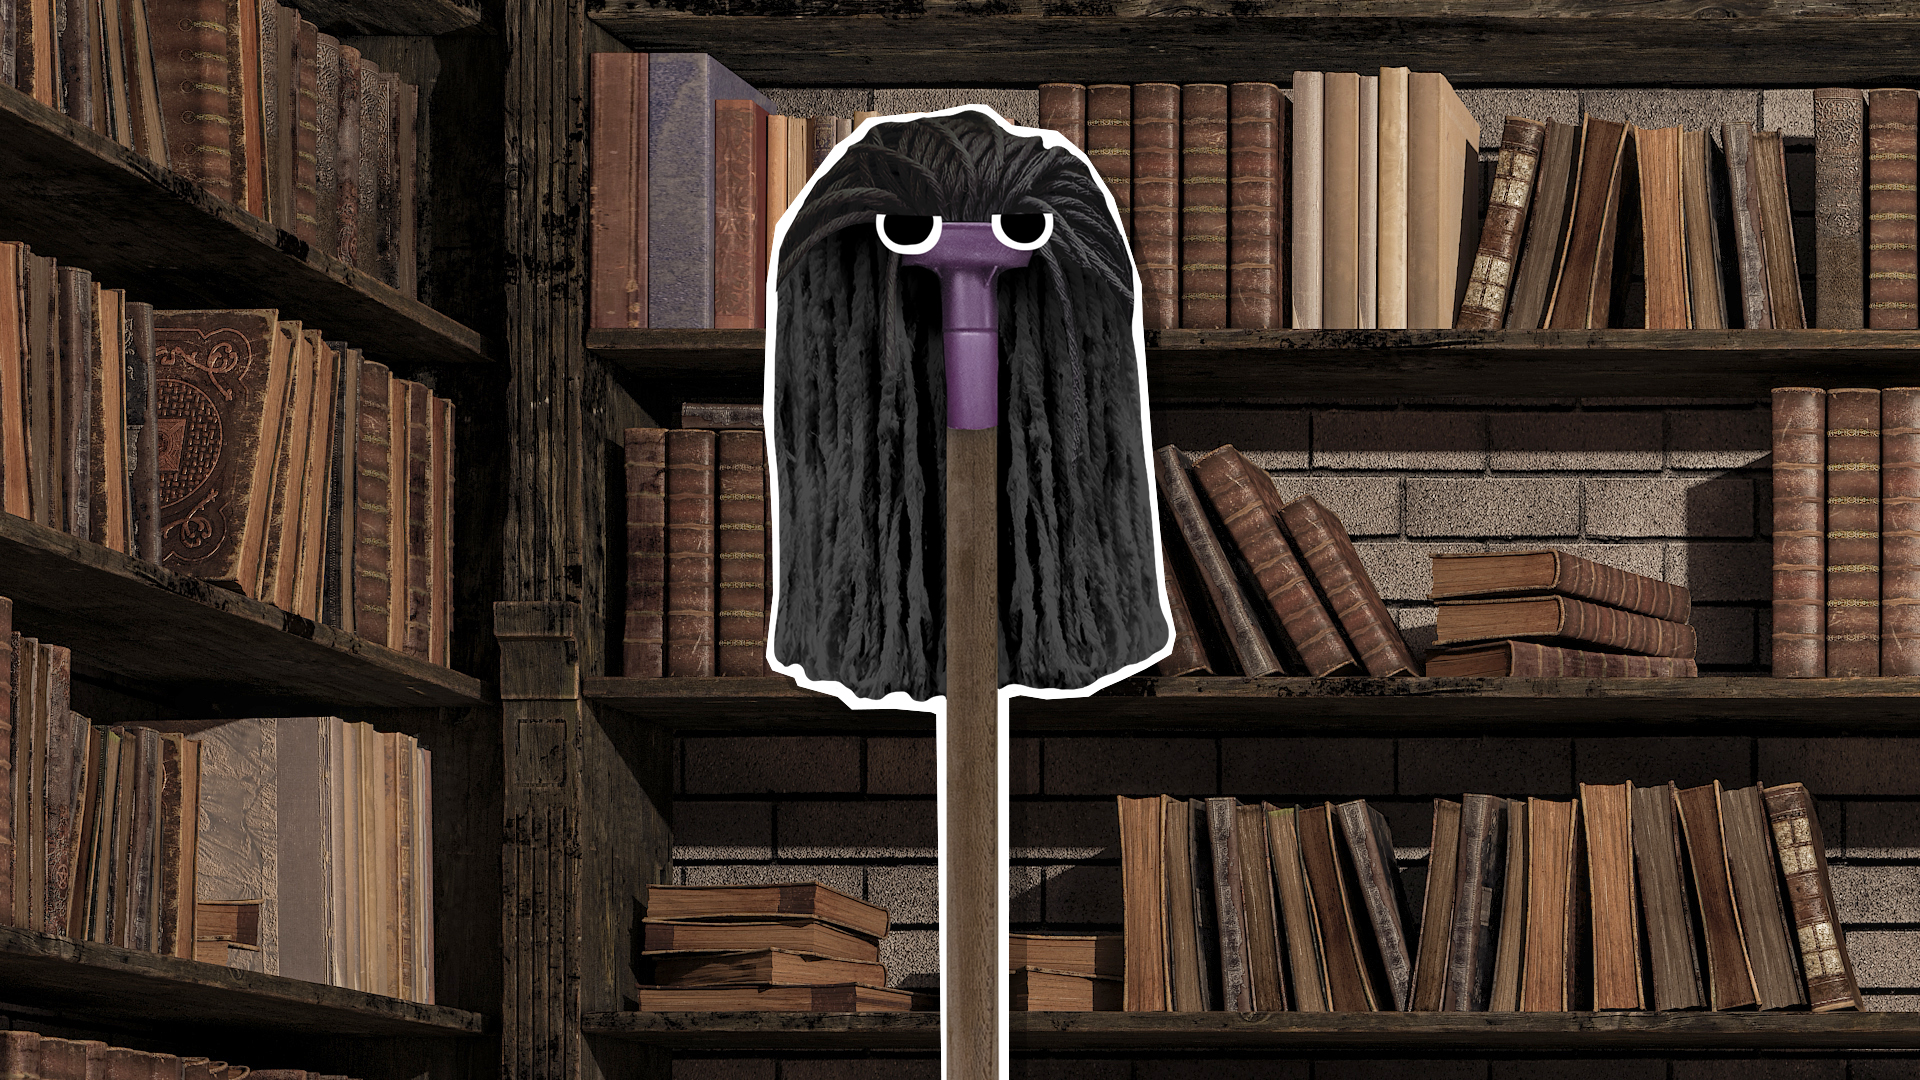 Snape in a library